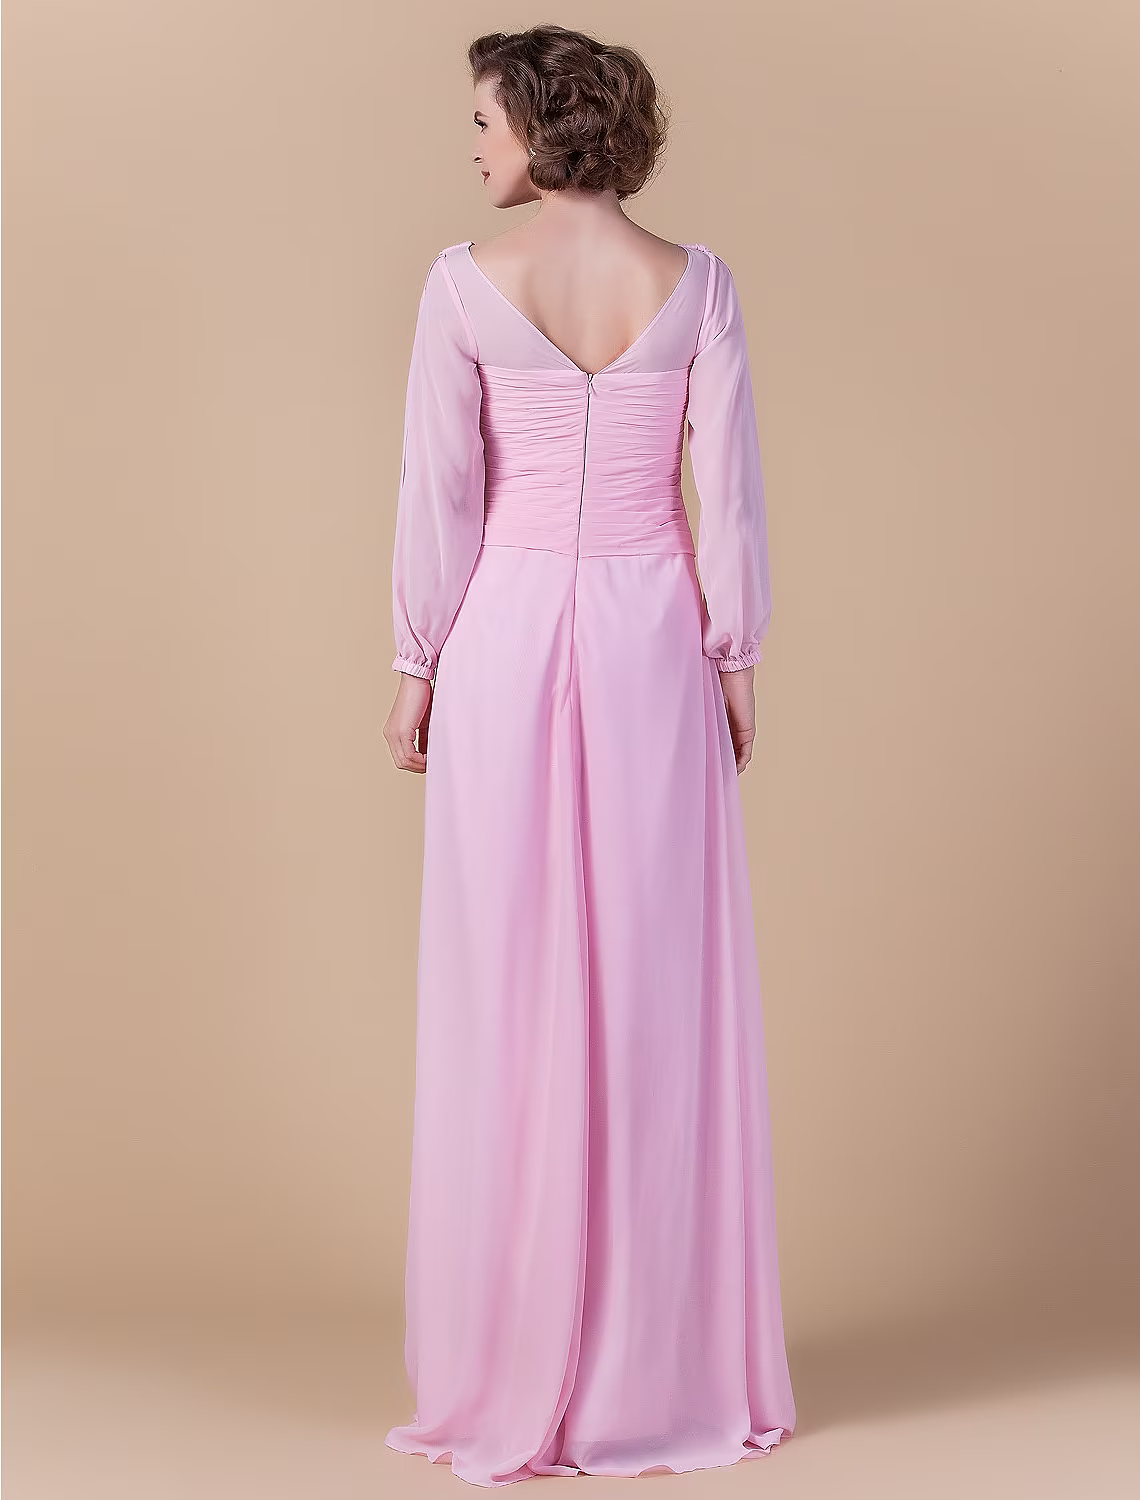 Mother of the Bride Dress Vintage Inspired Cowl Neck Floor Length Chiffon Long Sleeve with Criss Cross Ruched